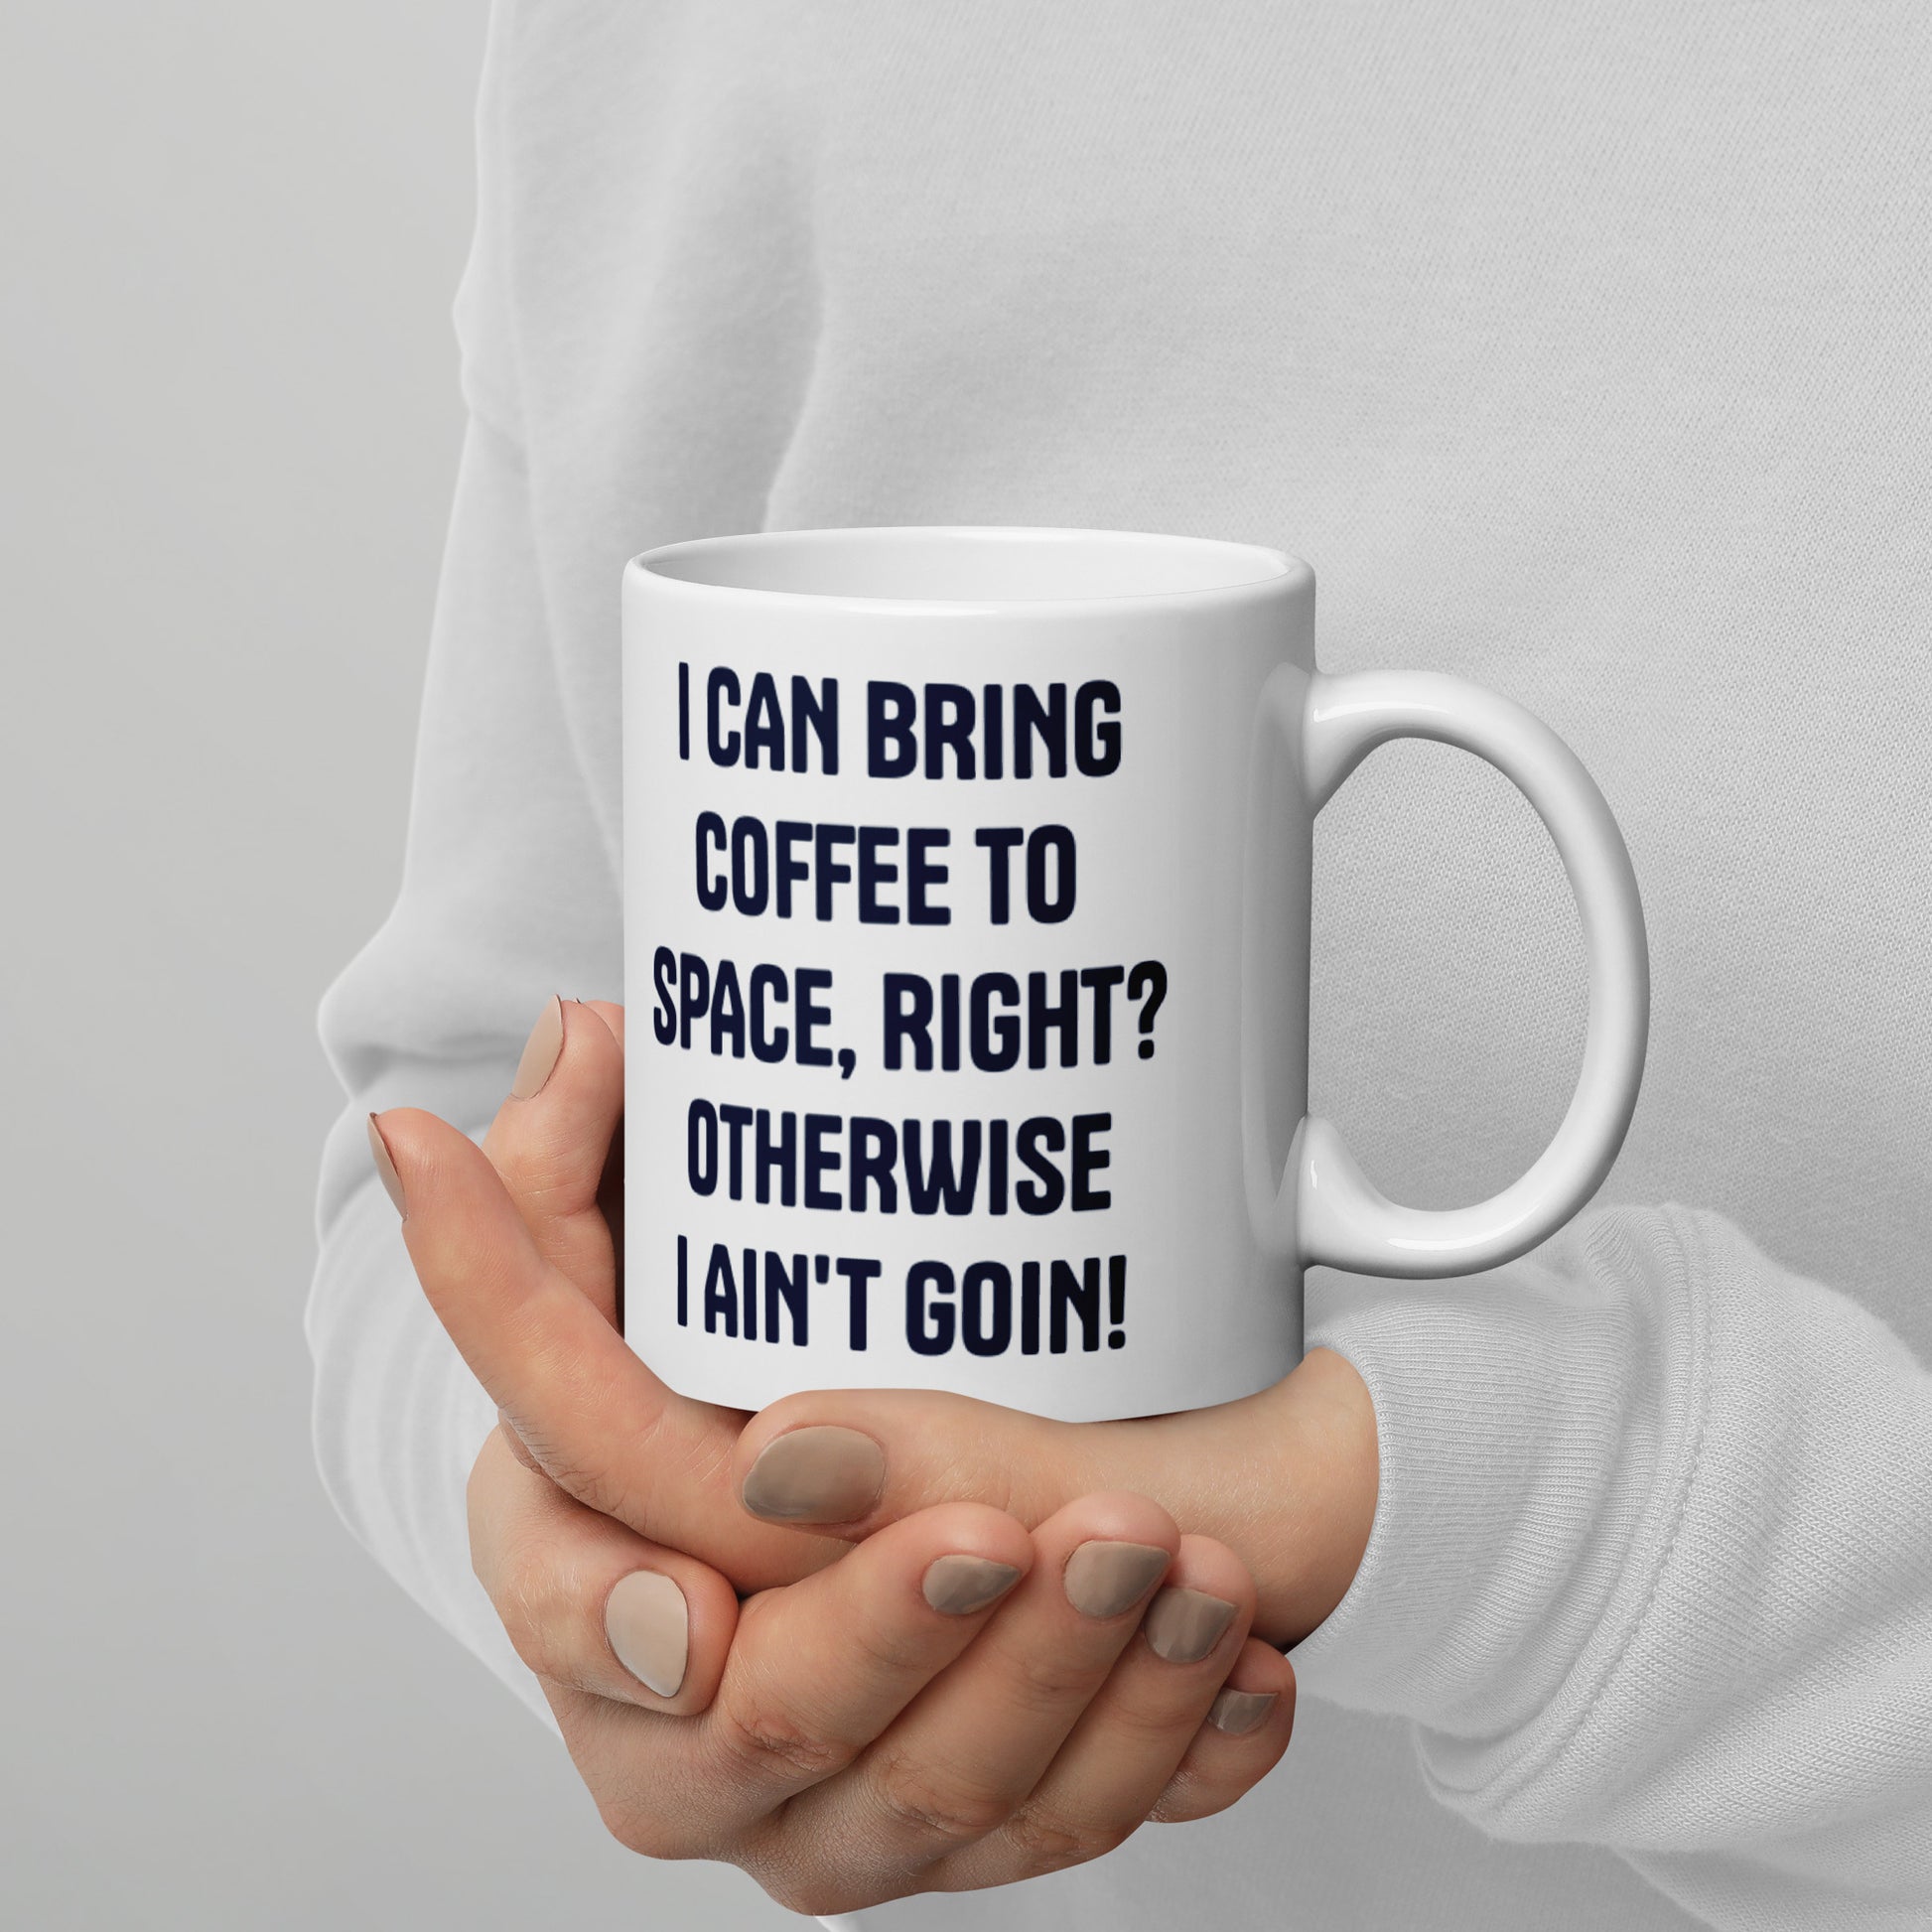 DAWN ON TITAN: Space Coffee Mug - back of mug, reading "I can bring coffee to space, right? Otherwise I ain't goin!" 